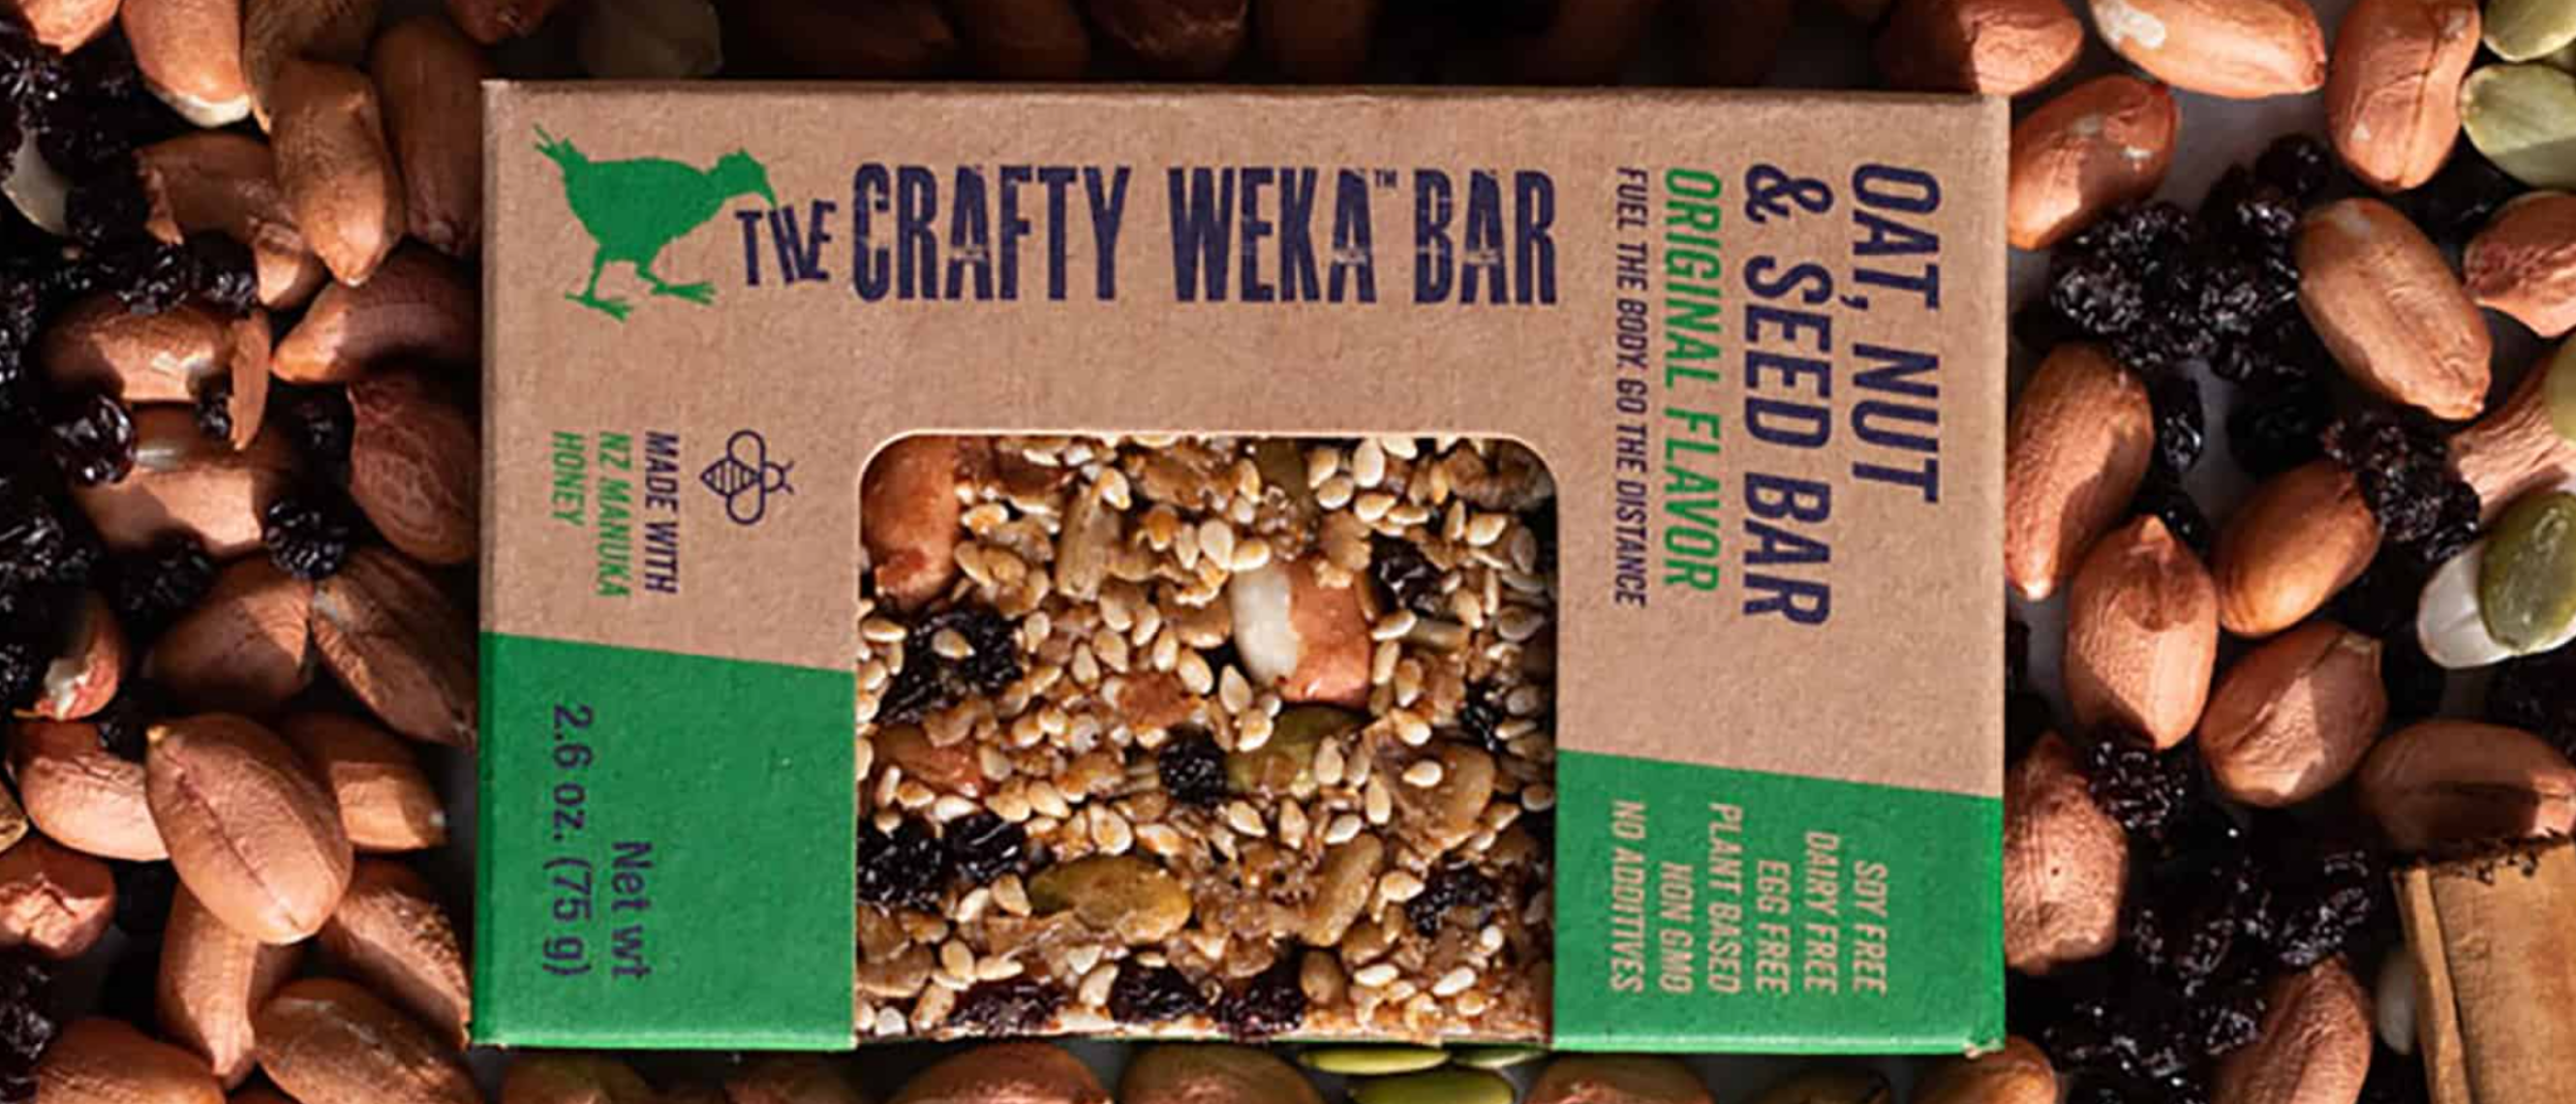 The Crafty Weka bar inside the February Oh Goodie! snack box